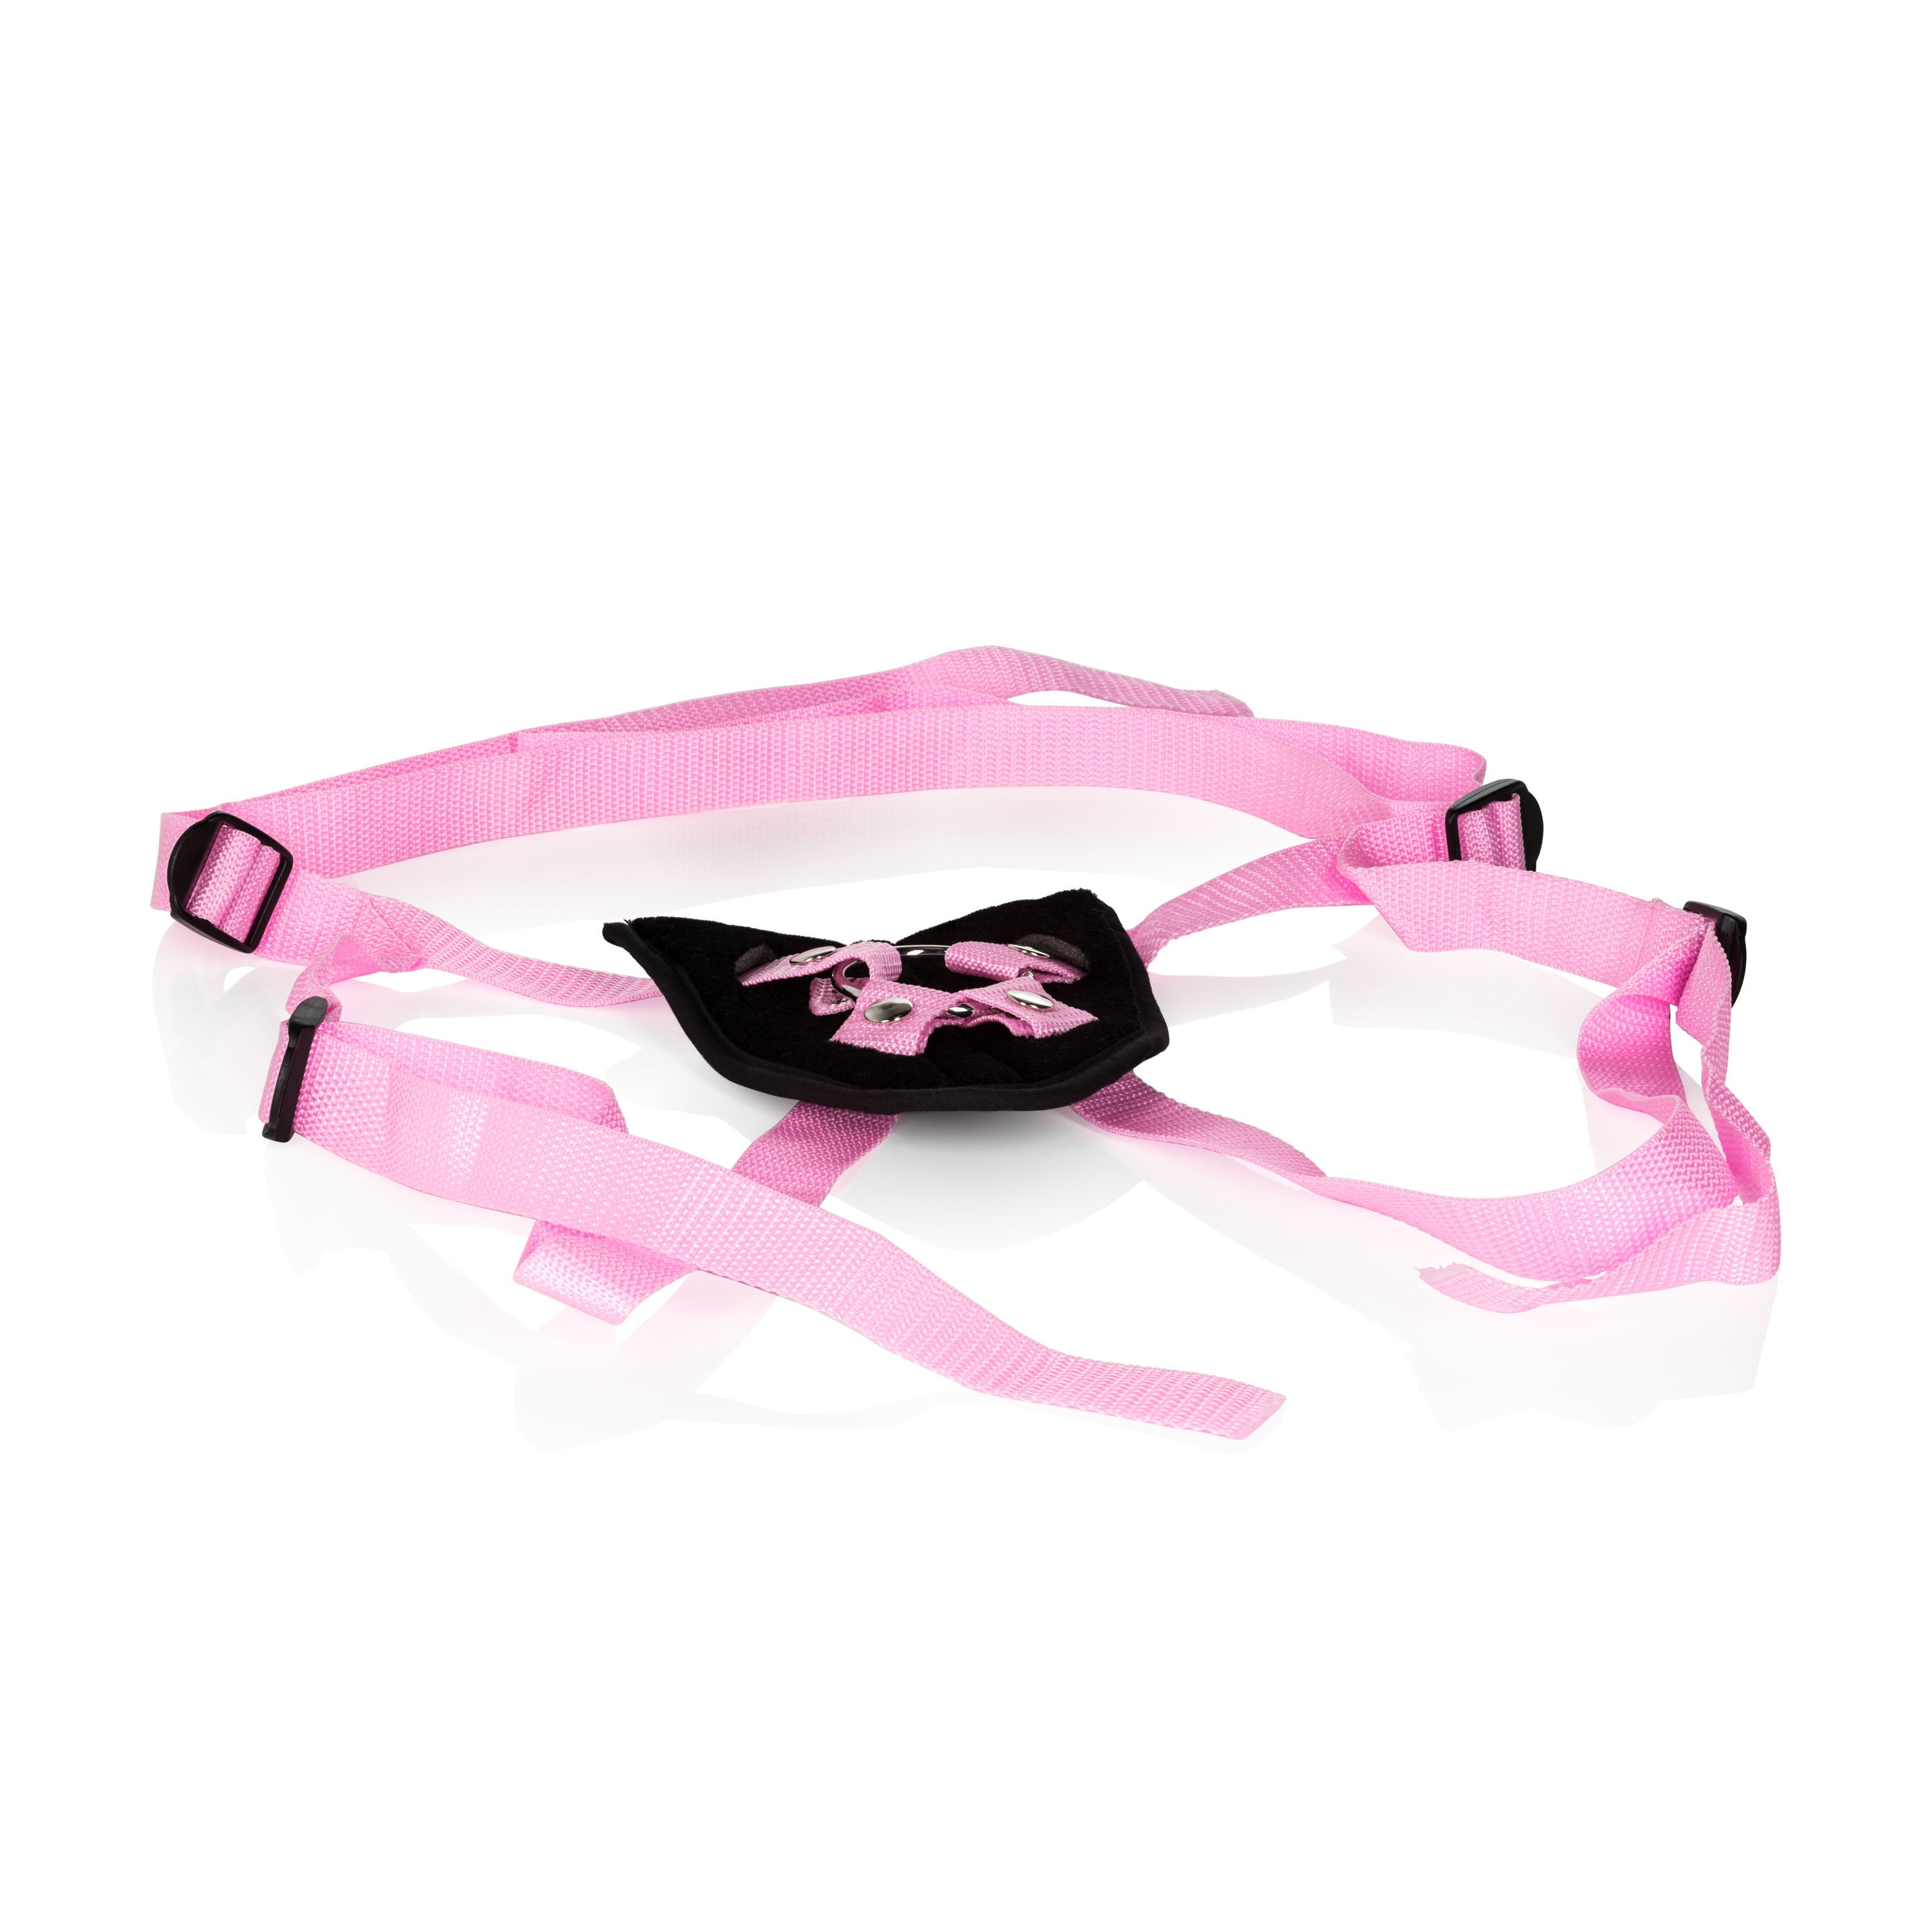 Shanes World Harness With Stud - Pink-8